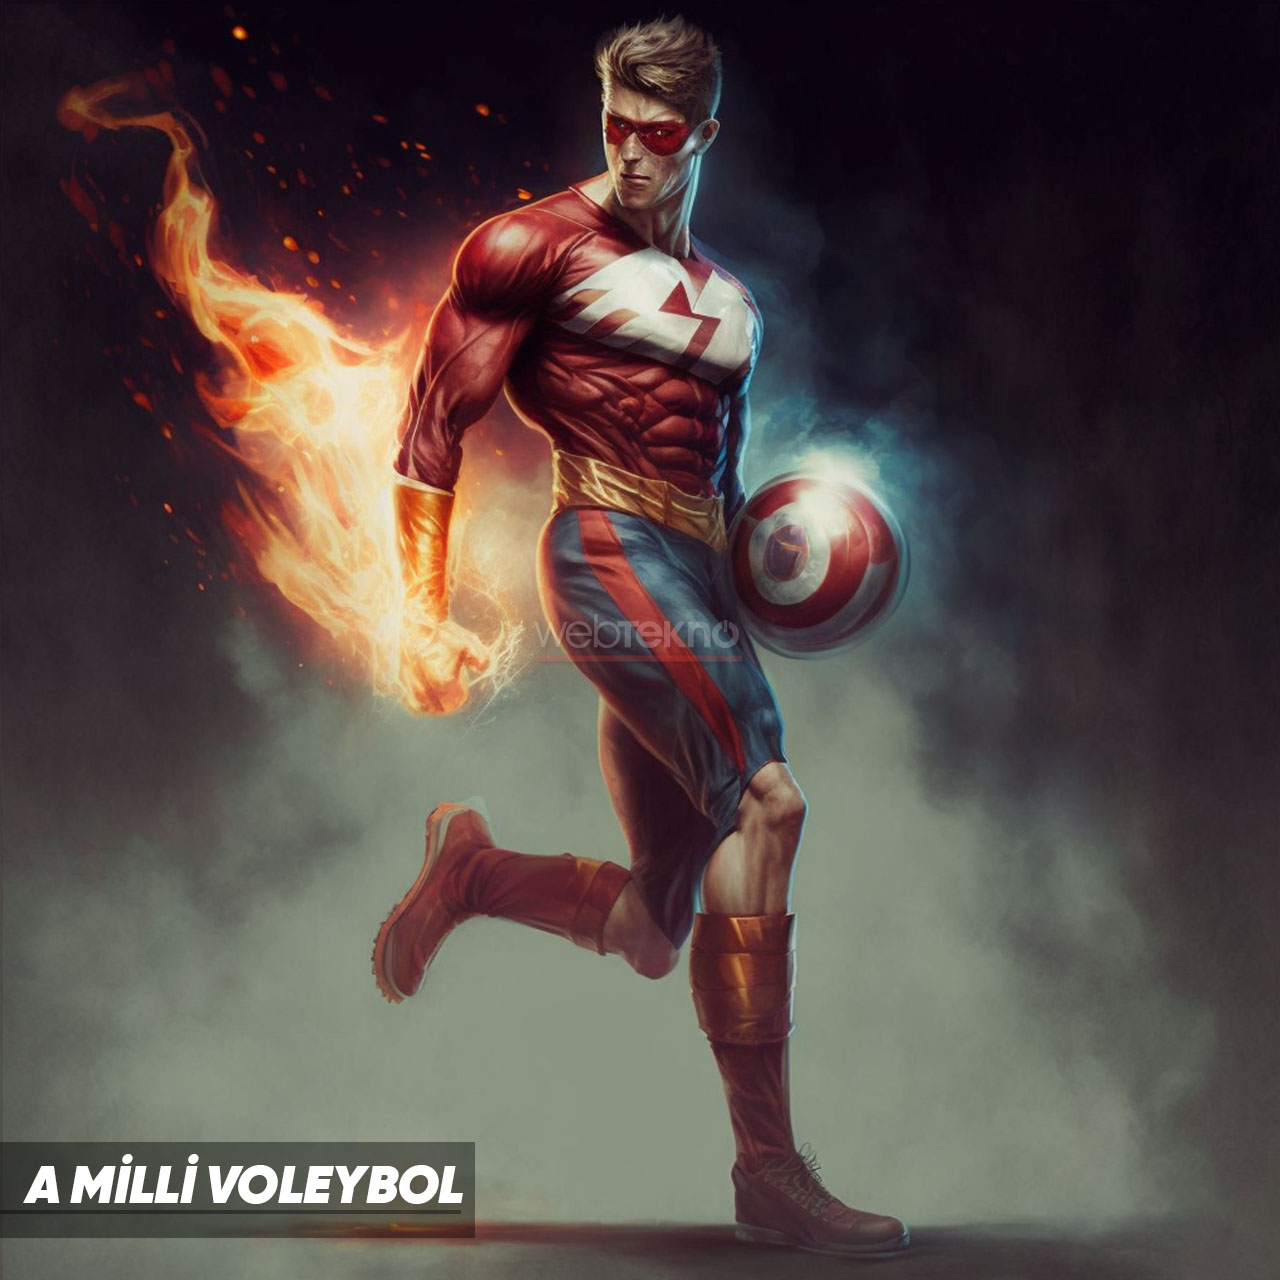 If our national volleyball team were superheroes